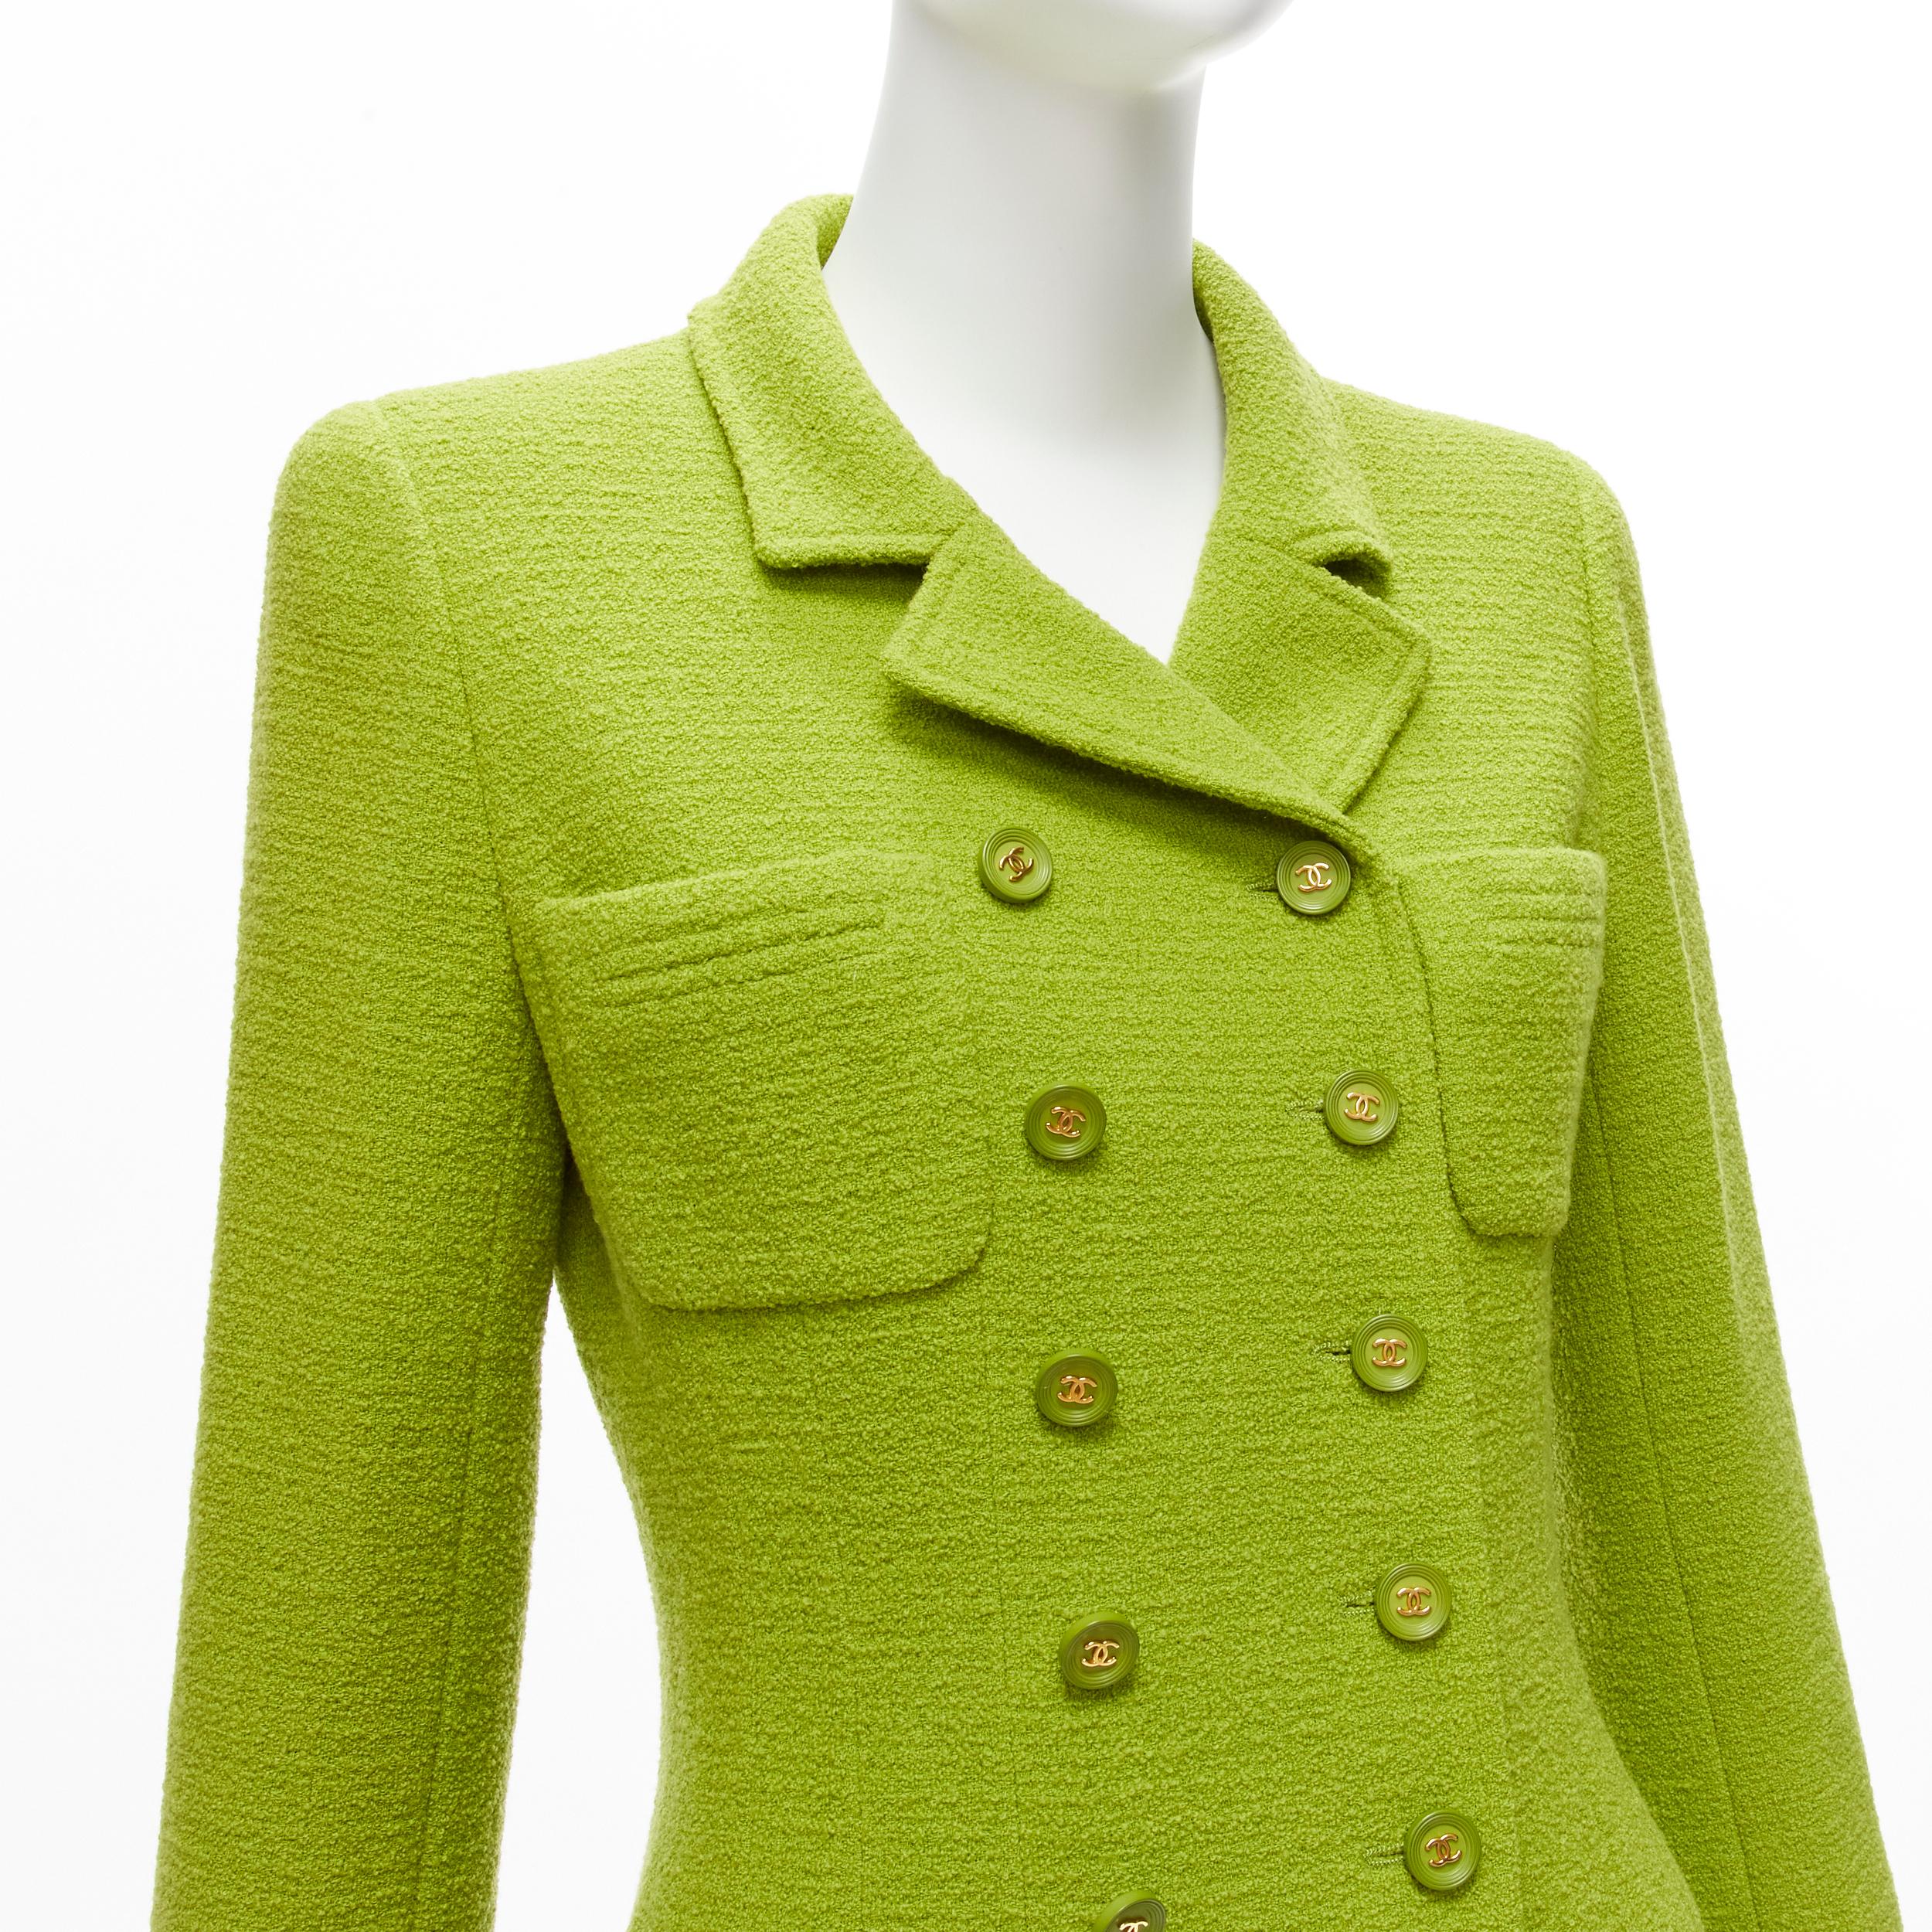 CHANEL Karl Lagerfeld 95A Vintage lime green tweed CC button blazer jacket FR40 L
Reference: TGAS/D00265
Brand: Chanel
Designer: Karl Lagerfeld
Collection: 95A
Material: Wool, Blend
Color: Green, Gold
Pattern: Solid
Closure: Button
Lining: Green